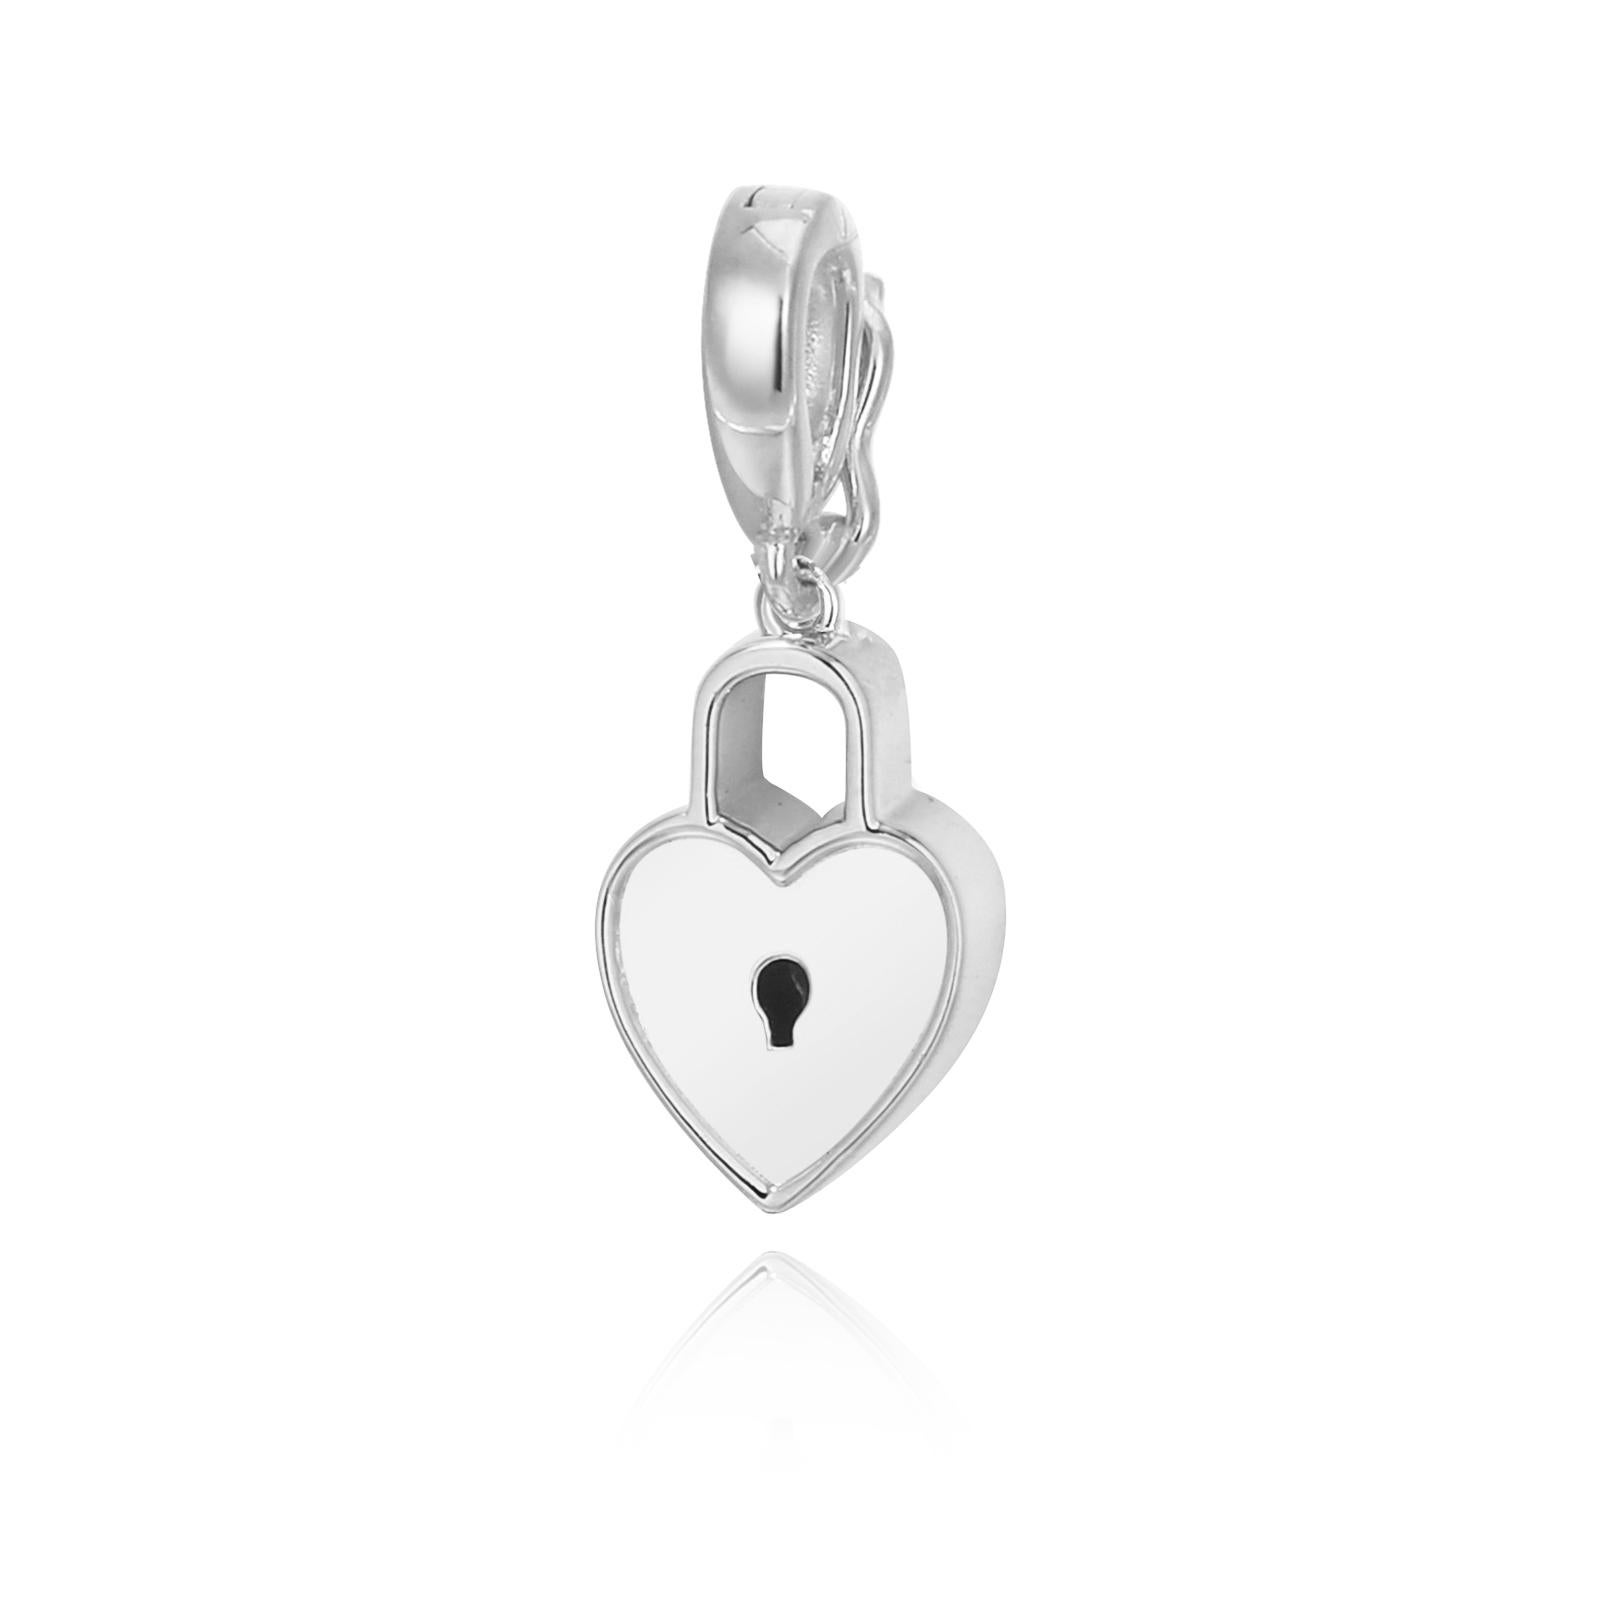 When it comes to self-expression, the style possibilities are endless. This heart lock pendant/charm gives you endless possibilities for mixing, matching and stacking, while showing your eternal and enduring strength . .925 sterling silver base.